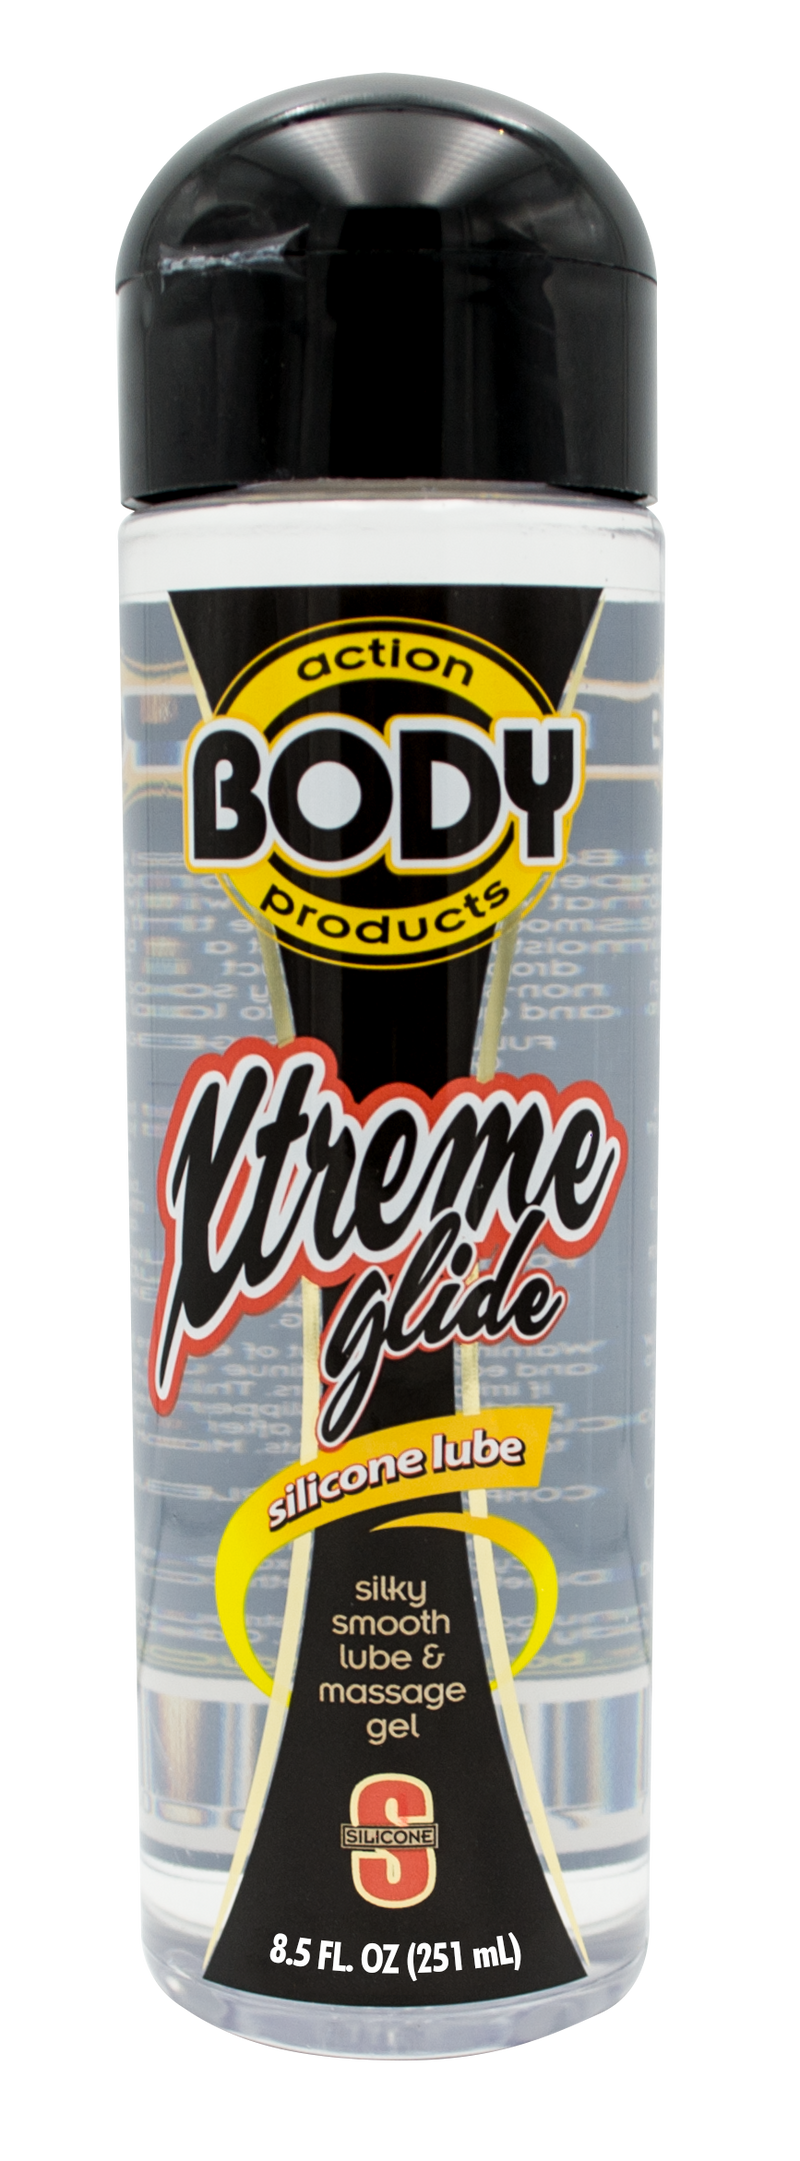 Xtreme Glide Silicone-Based Lubricant for Ultimate Slip and Slide - 8.5 Oz Bottle